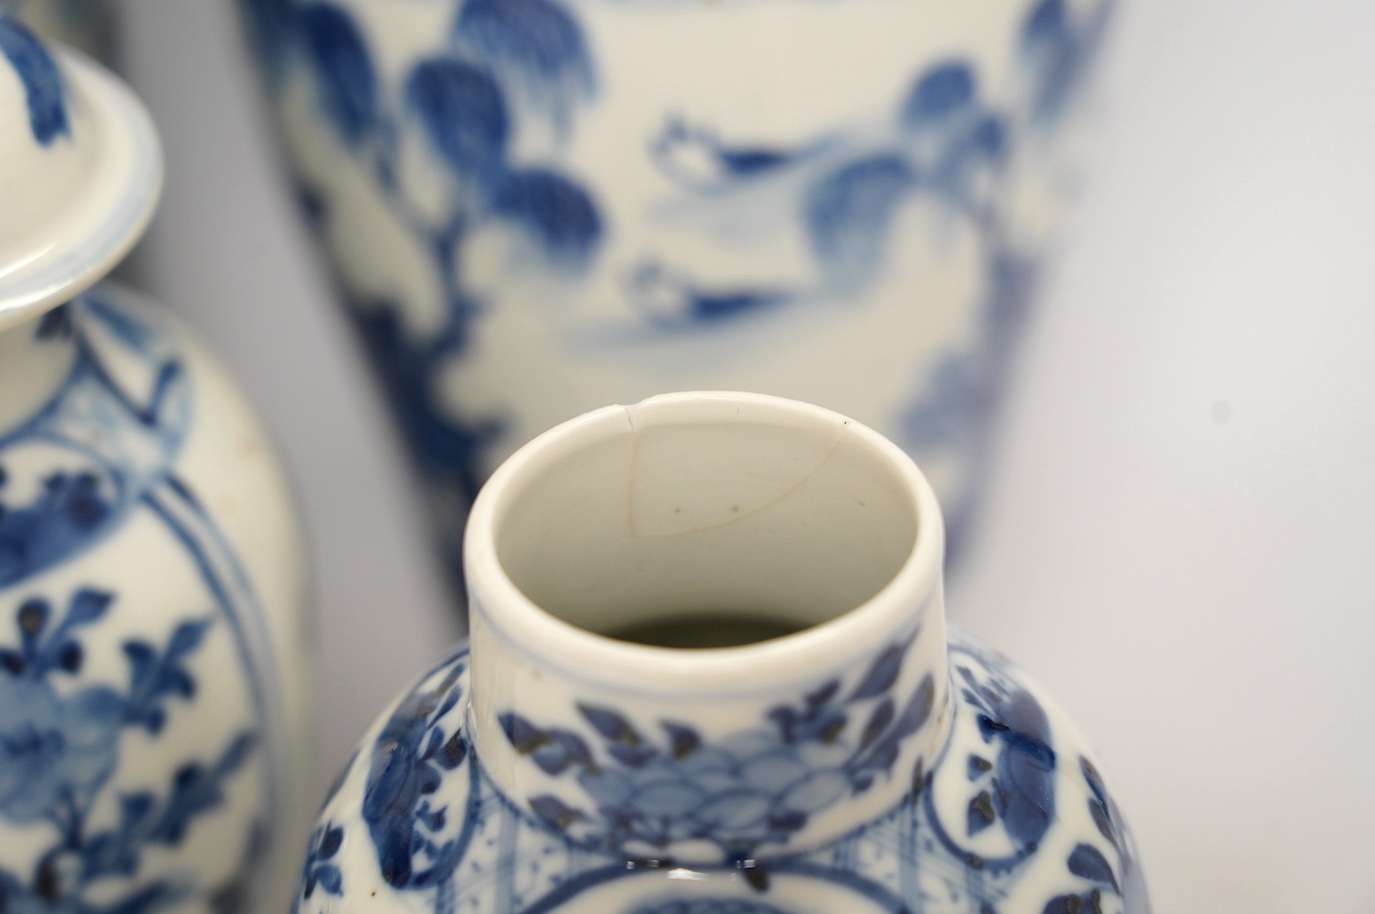 Five blue and white Chinese export porcelain vases, tallest 30cm high. Condition - one cover on a vase is chipped another cover (on pair of vases) is chipped, the three other vases are good